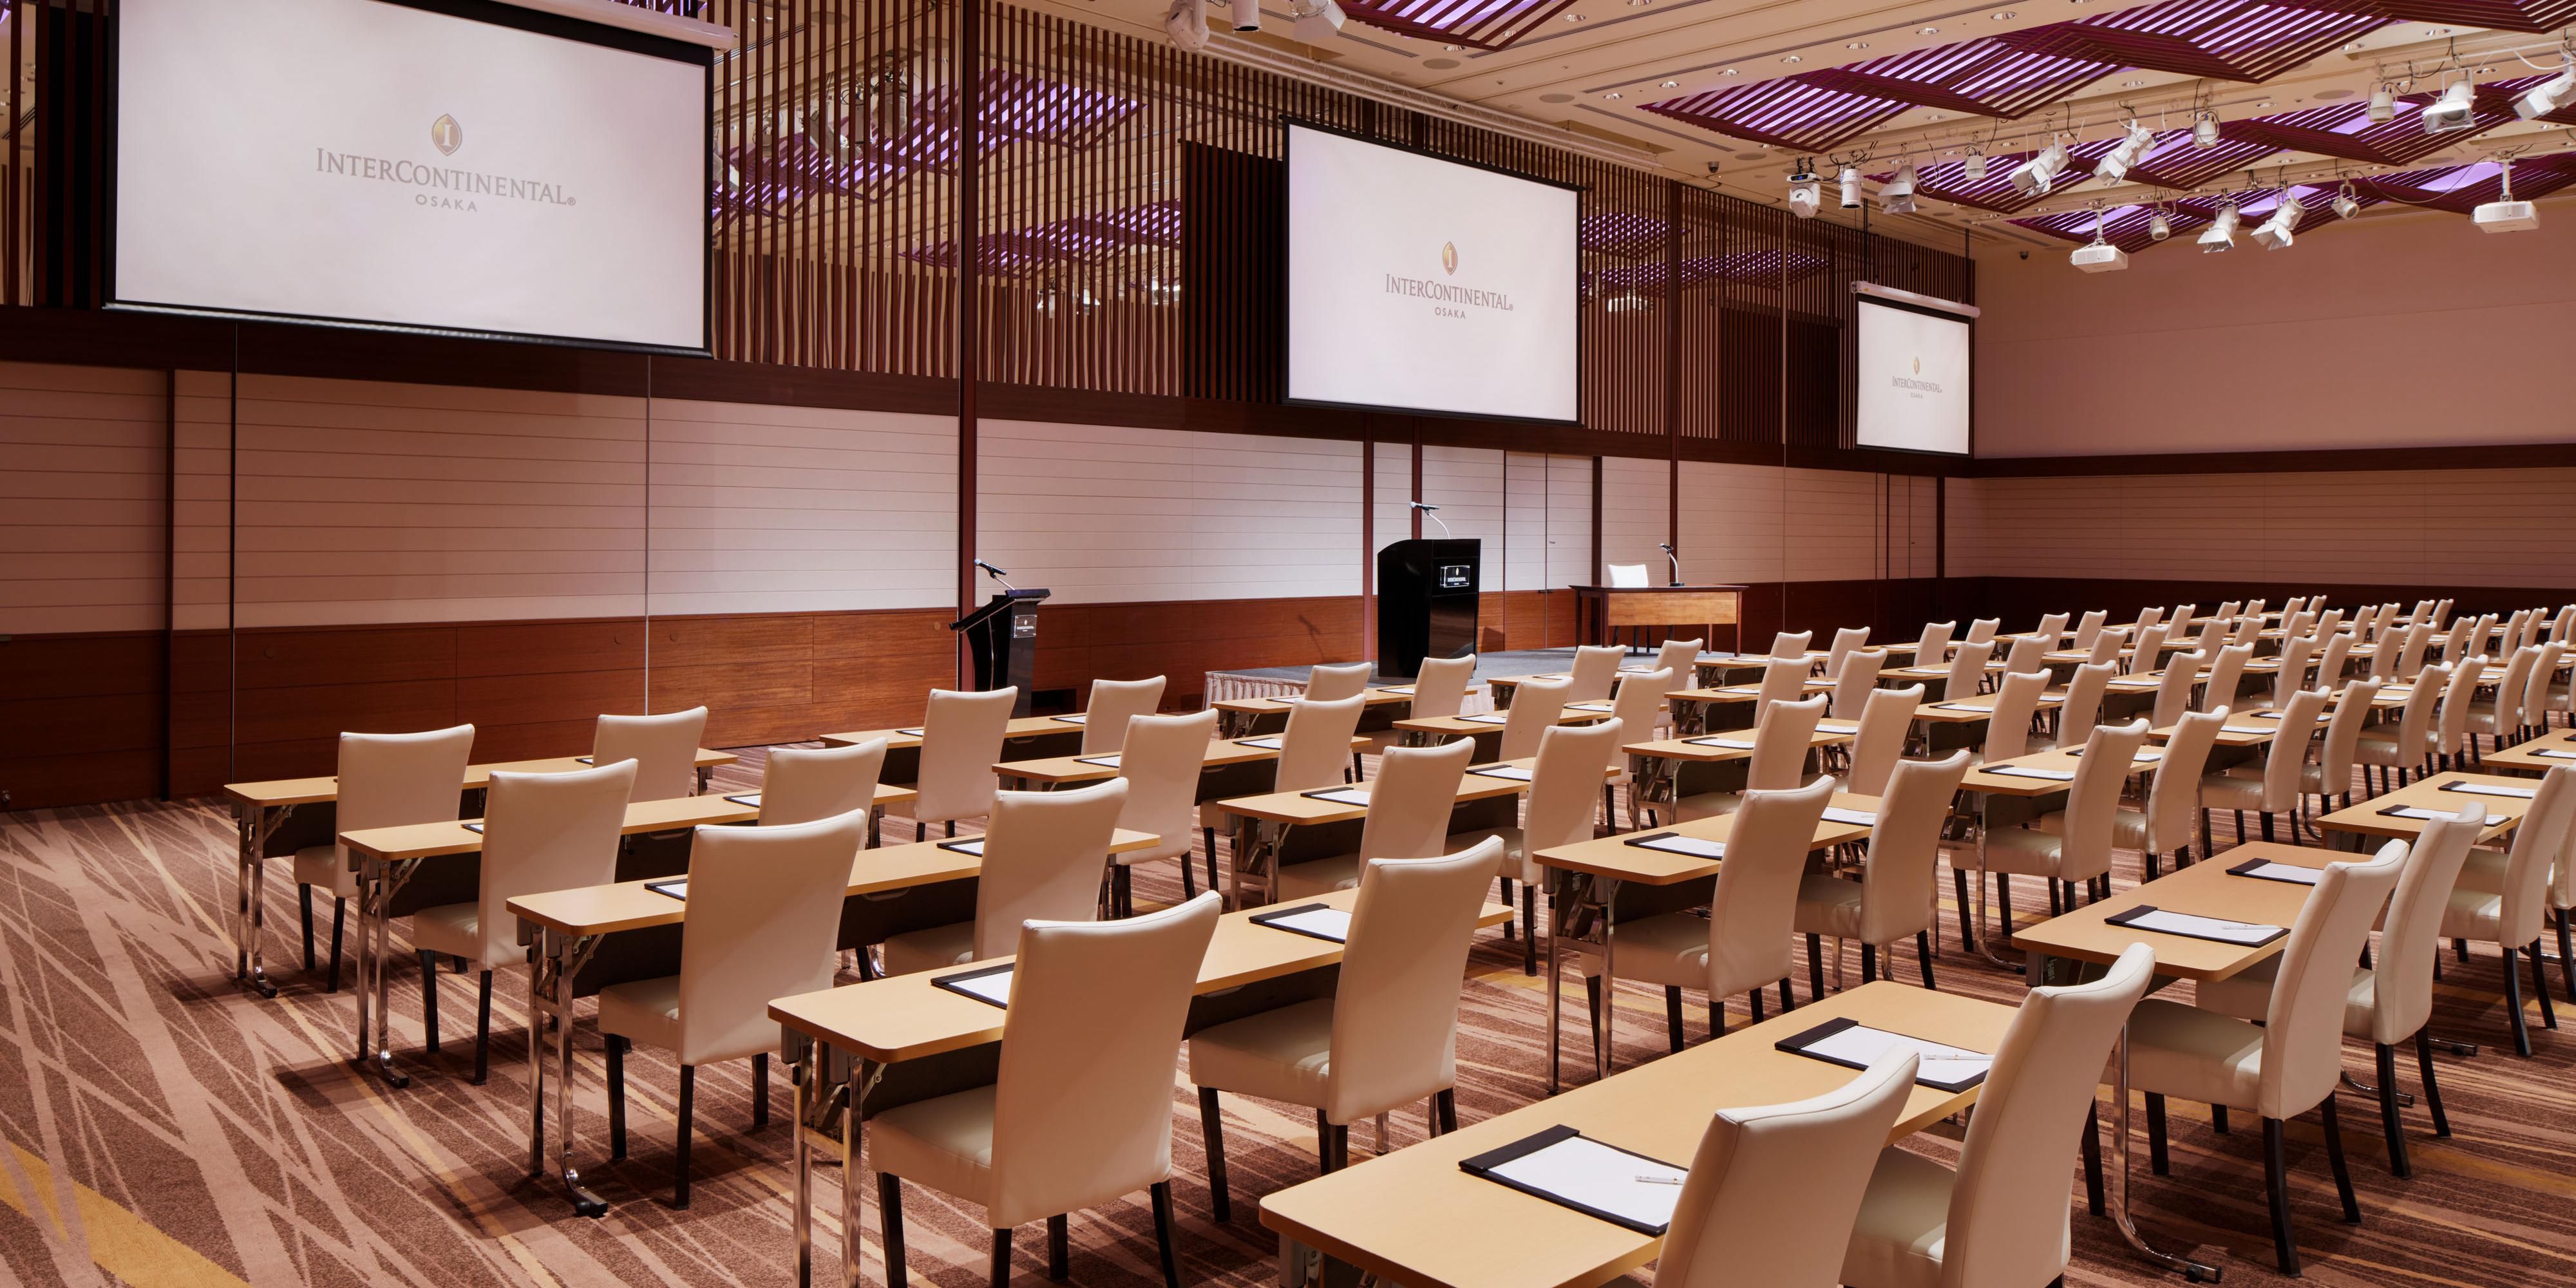 Let our team of experts curate and create the ideal event to fit your needs. Through our global meeting program, InterContinental Meetings, we create unique and effective corporate events designed to support the success of your business by featuring local Kansai food and cultural experiences.